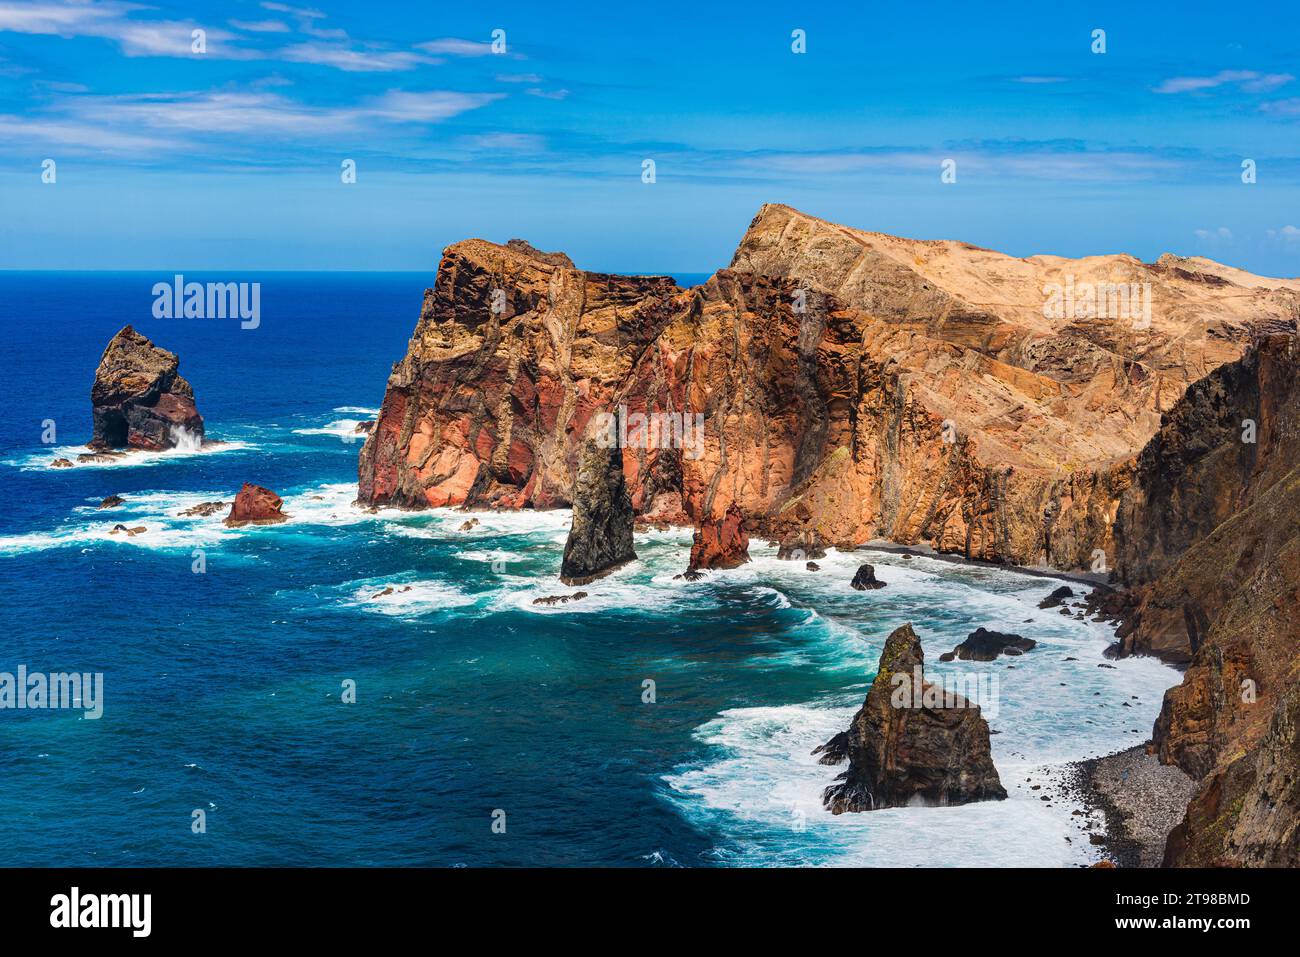 Dramatic rock formation and blue ocean on Madeira coast. Stock Photo